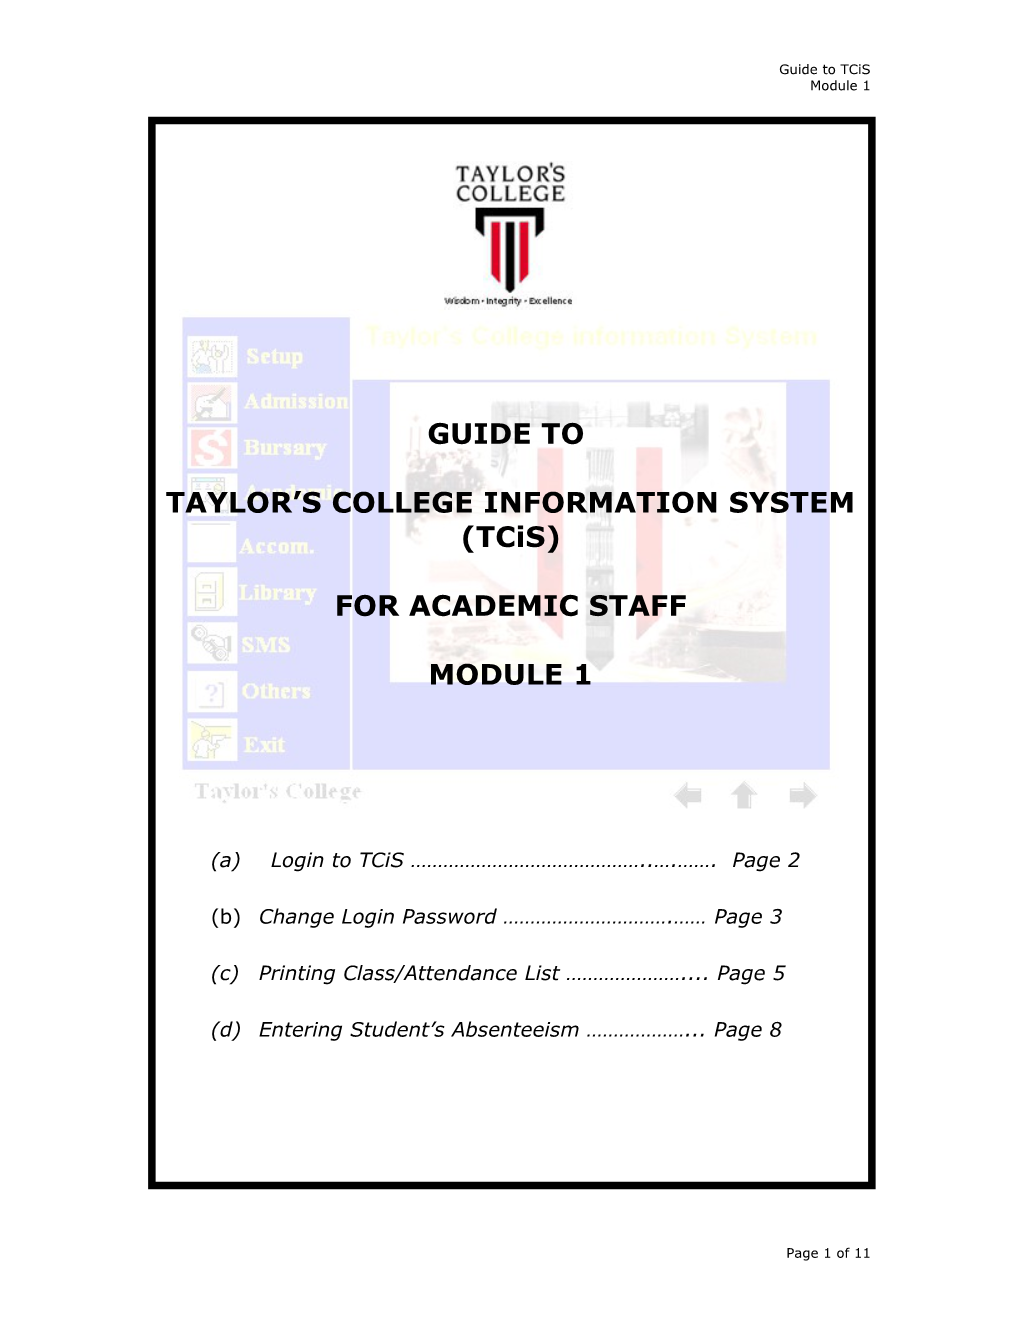 TAYLOR S COLLEGE INFORMATION SYSTEM (Tcis)